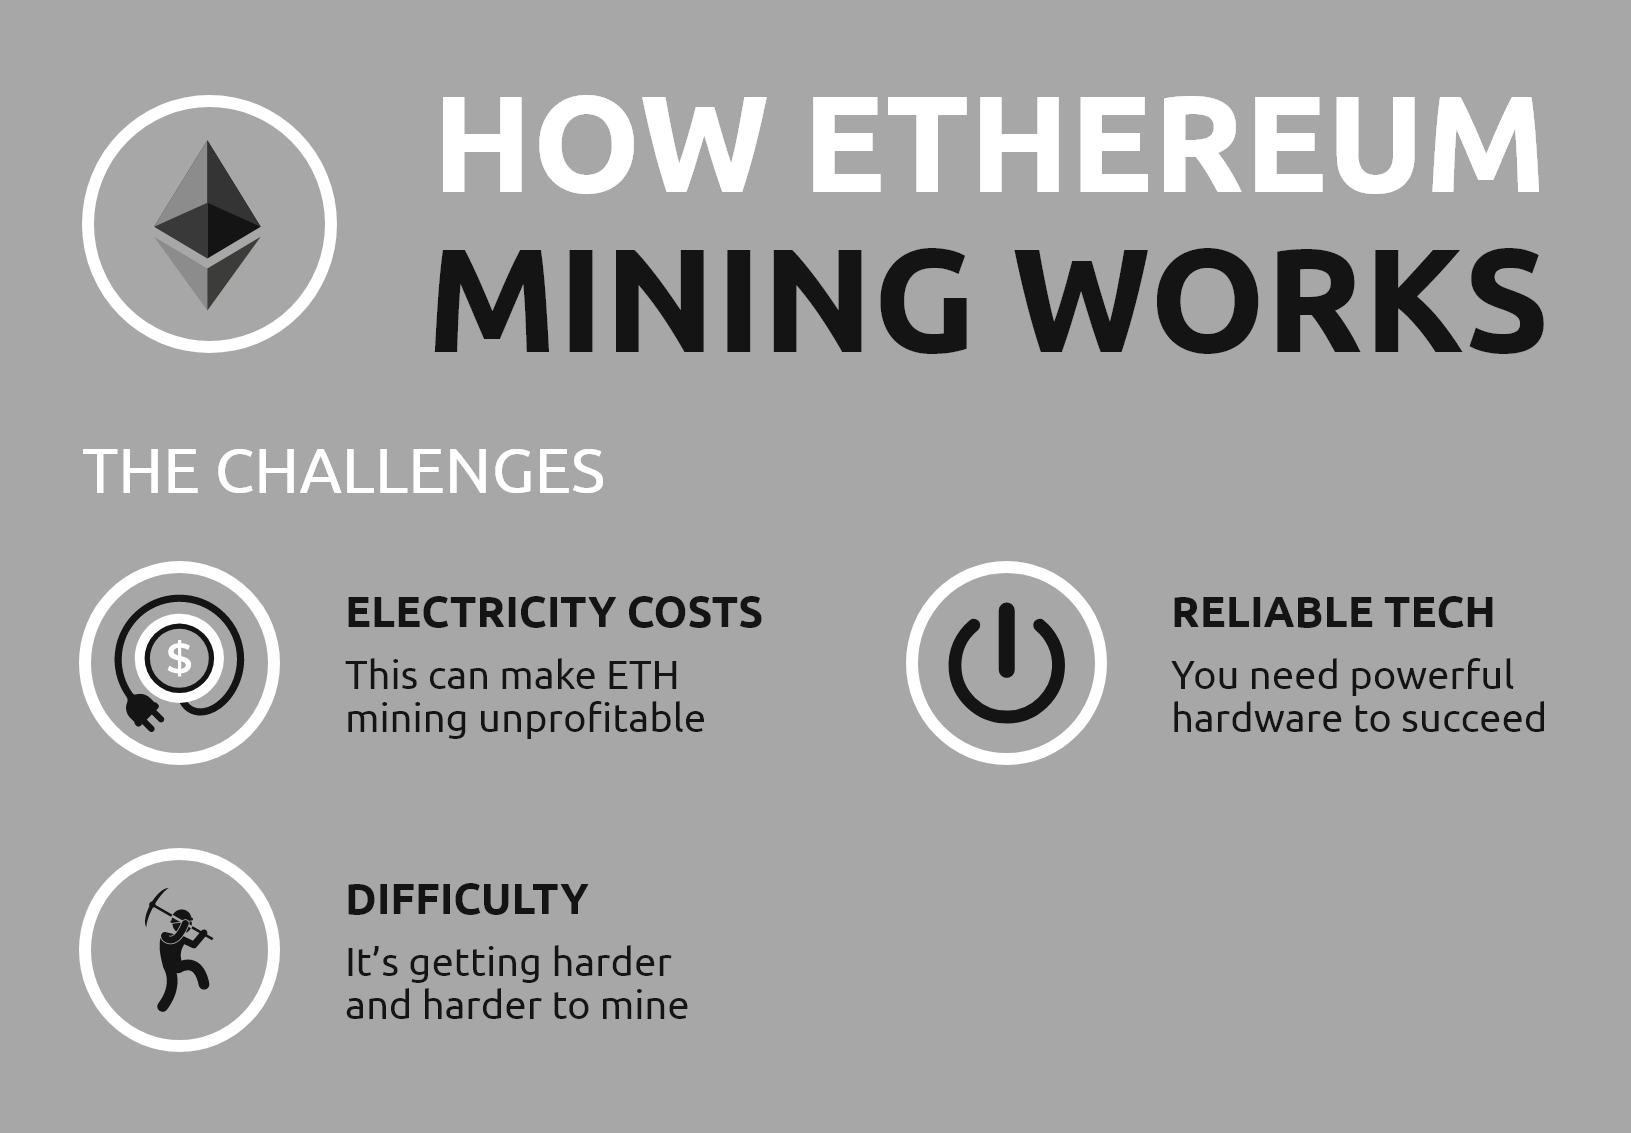 How to get starte mining ethereum dollar cost averaging value investing